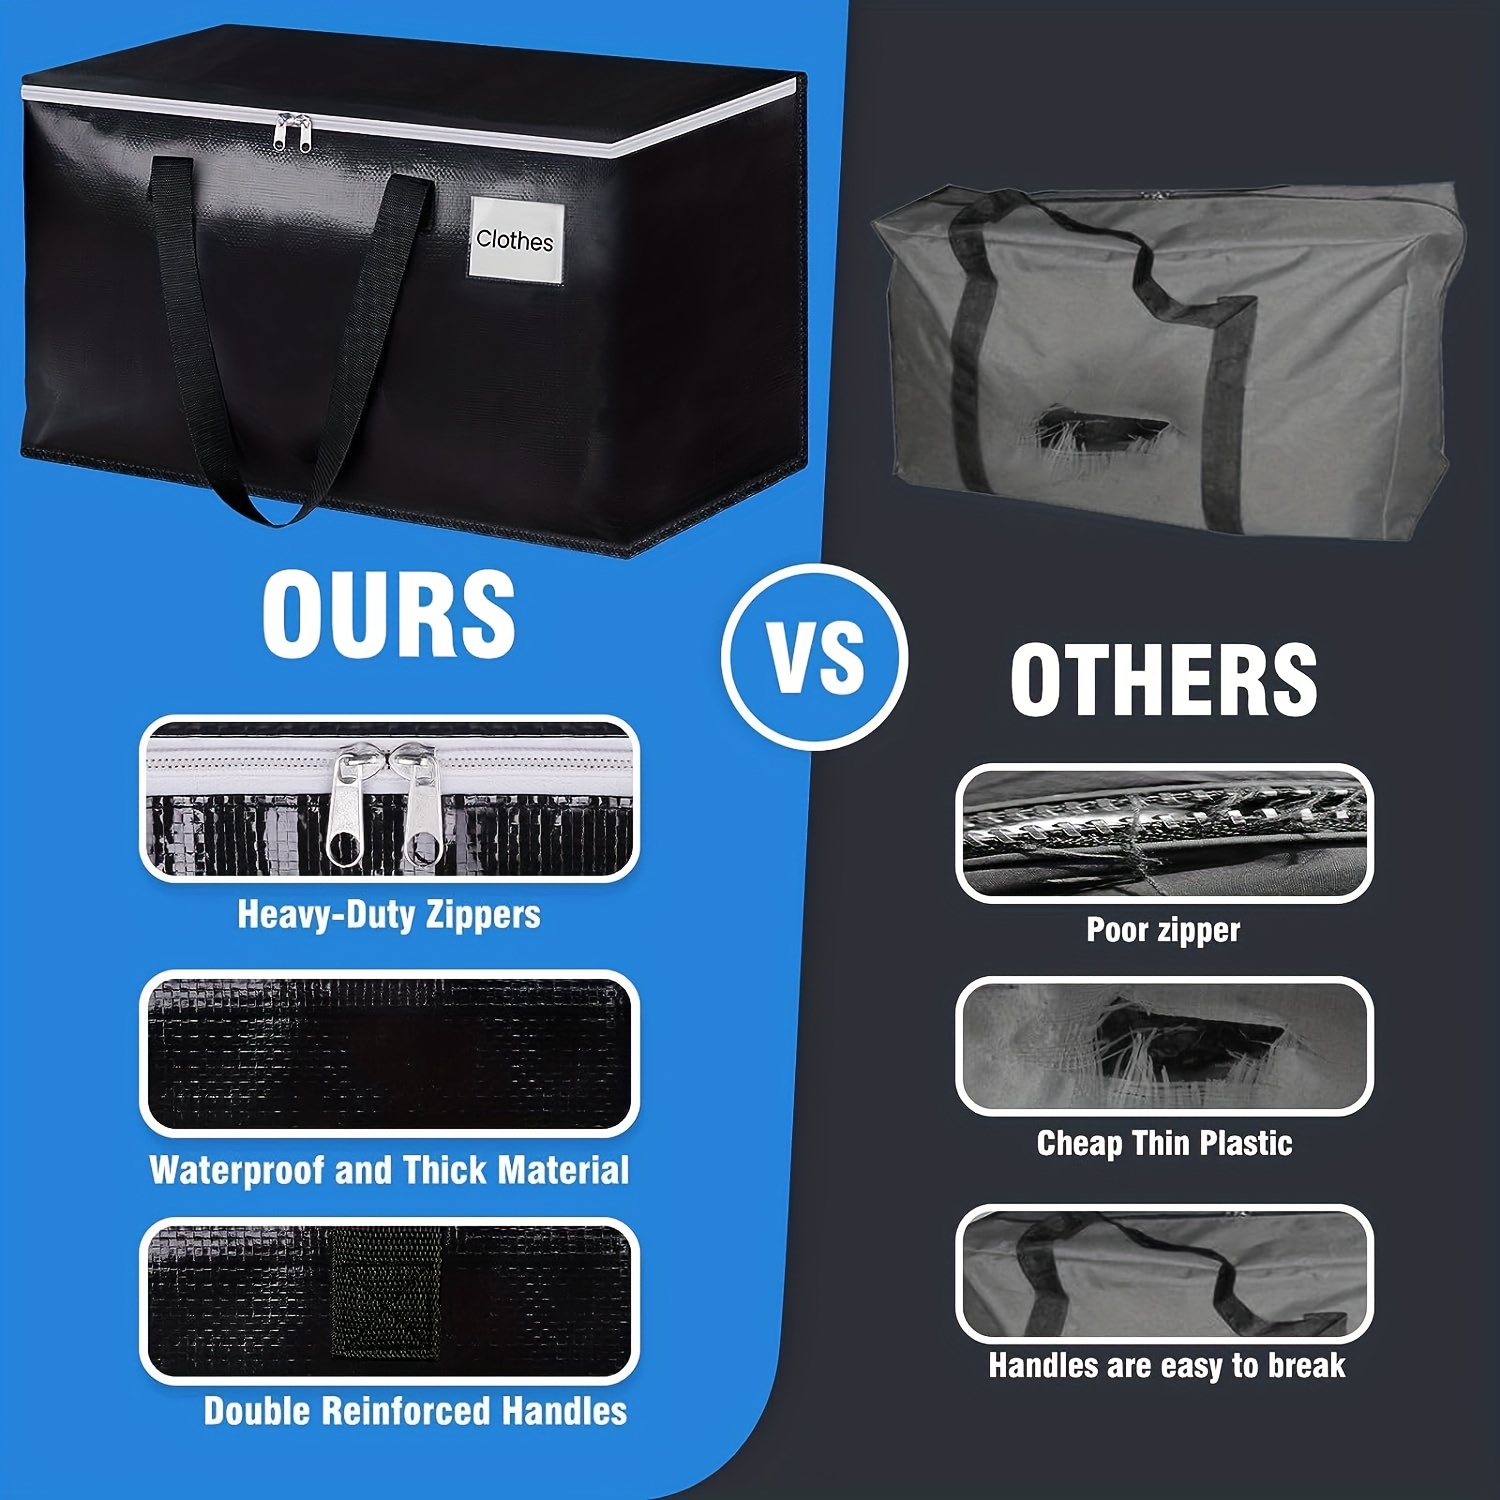 Moving Boxes Heavy Duty Moving Bags with Strong Zippers and Handles  Collapsible Moving Supplies, Storage Totes for Packing & Moving Storing  93L